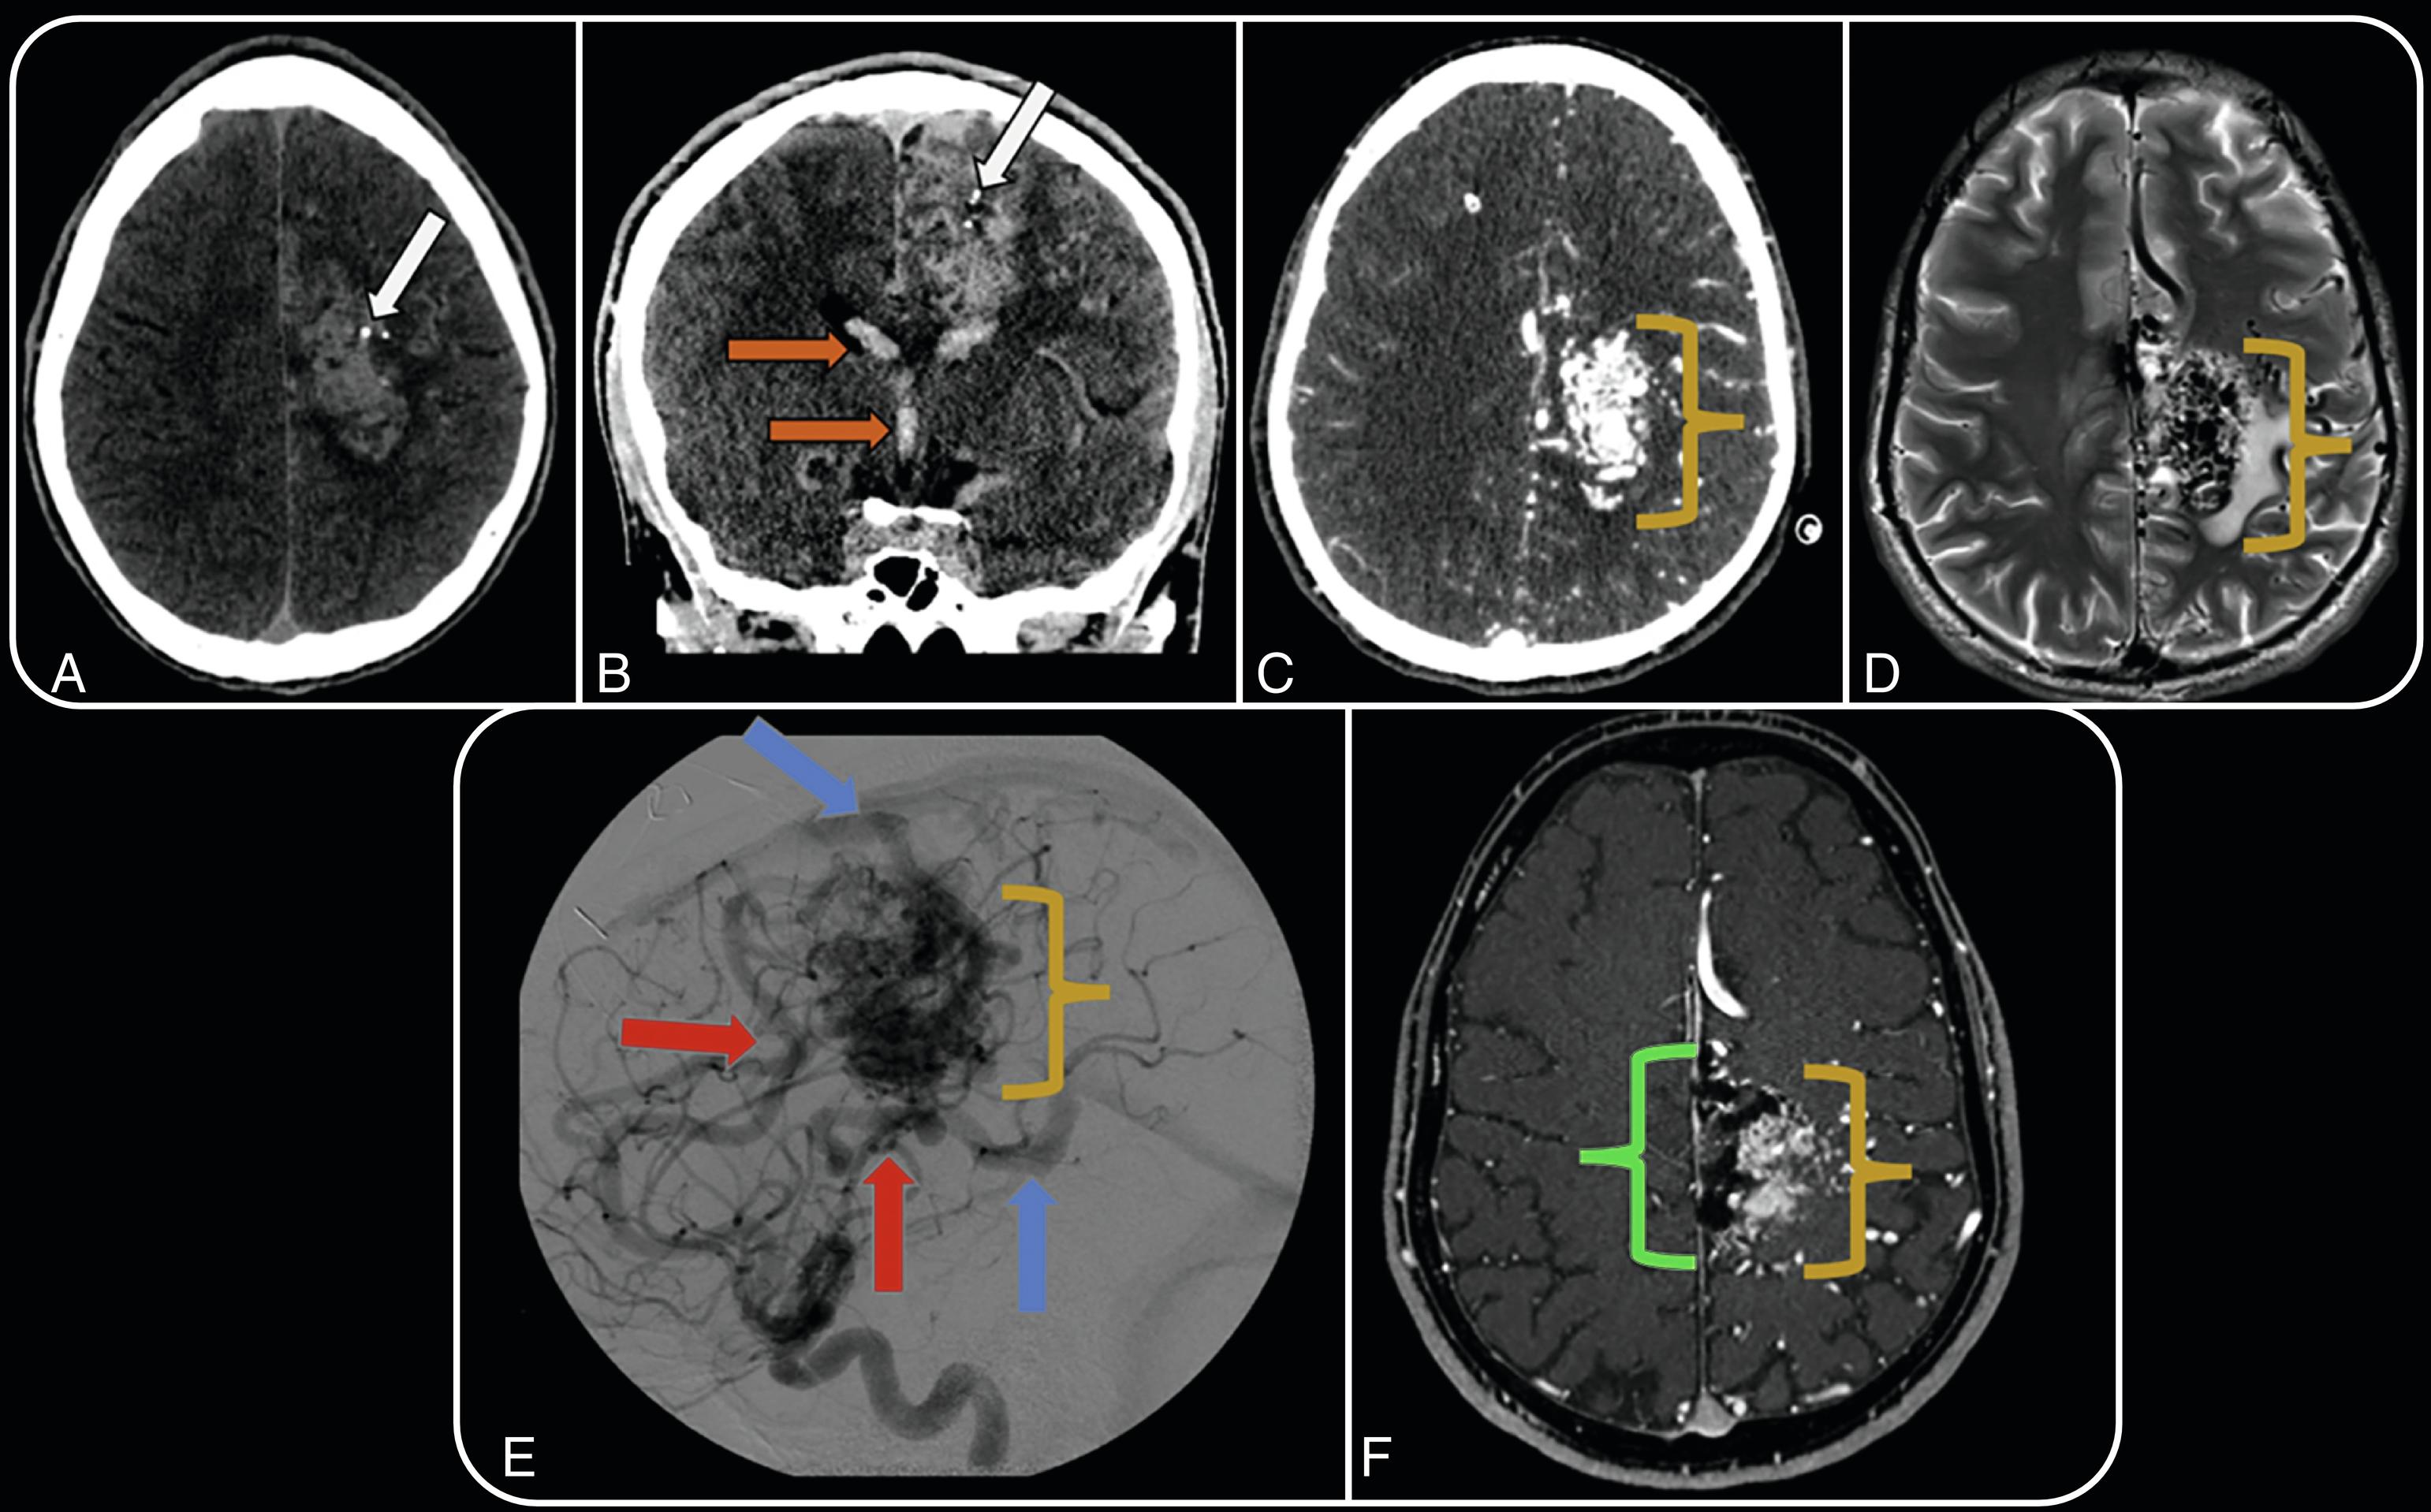 Fig. 3.3, A 20-year-old man presents with altered mental status. Axial ( A ) and coronal ( B ) noncontrast CT images demonstrate acute intraparenchymal and intraventricular hemorrhage ( orange arrows ; B ) with evidence of punctate calcifications ( white arrow ; A and B ). Axial CT angiogram ( C ), axial T2-weighted MR image ( D ), and left internal carotid artery injection lateral digital subtraction angiography projection ( E ) confirm the presence of a large left frontoparietal AVM, Spetzler-Martin grade IV, with arterial feeders arising from hypertrophied branches of the left anterior cerebral artery, left middle cerebral artery, left posterior cerebral artery, and lateral lenticulostriate arteries ( red arrows ; E ), with evidence of both deep and superficial drainage via the vein of Galen and superior sagittal sinus ( blue arrows ; E ). Subsequent posttreatment follow-up axial gadolinium-enhanced 3D time-of-flight MR angiogram ( F ) demonstrates partial embolization of the AVM, with evidence of left parasagittal embolization material ( green bracket ; F ) and persistent nidus ( yellow bracket ; C – F ).